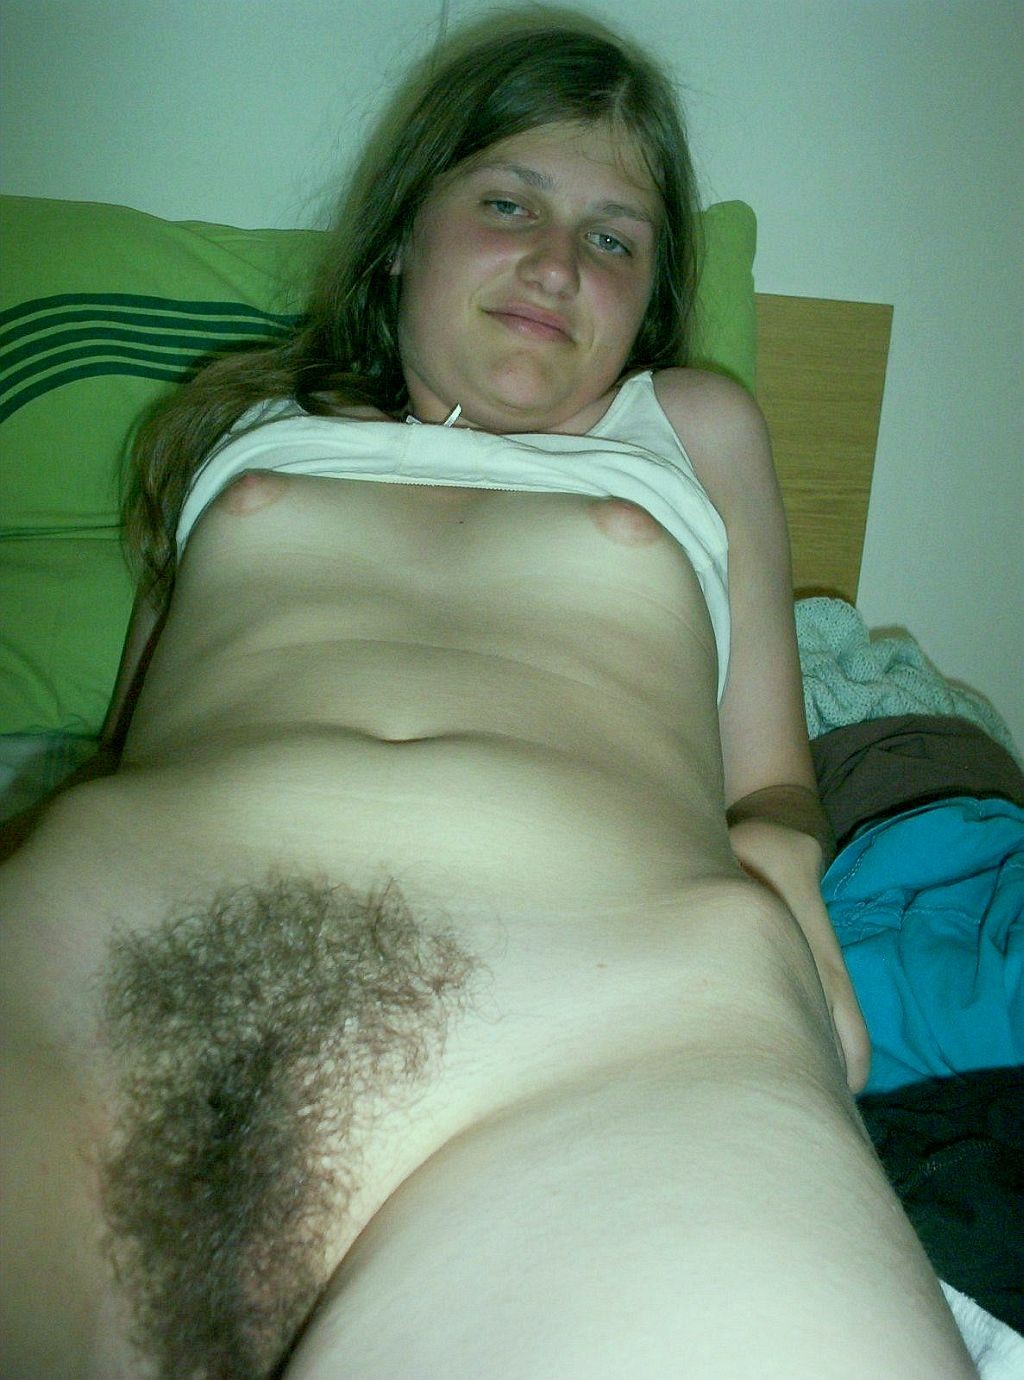 Real hairy amateur photoshoot